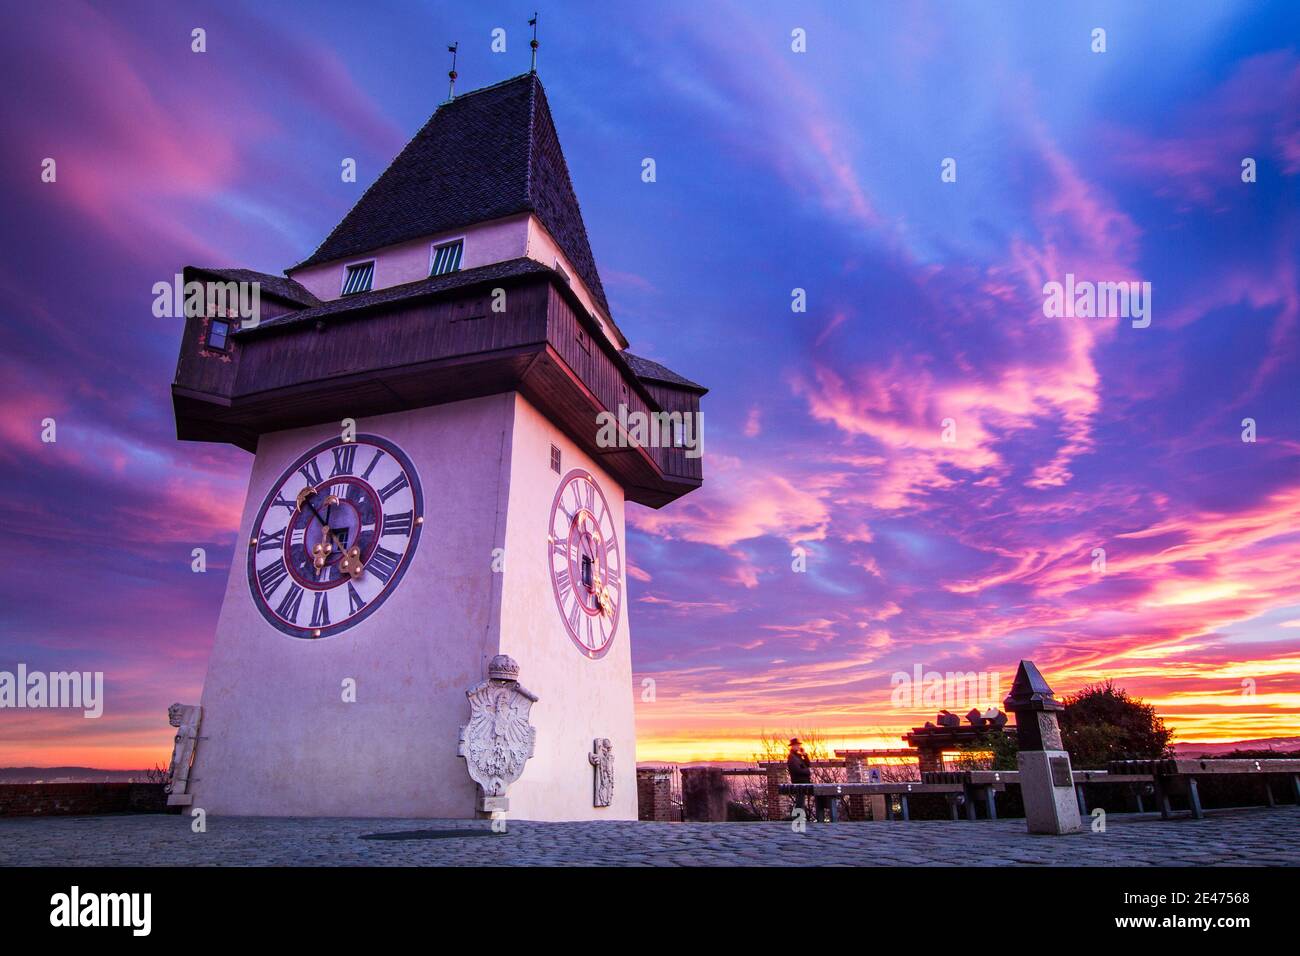 The famous clocktower as a landmark of the city of Graz Stock Photo